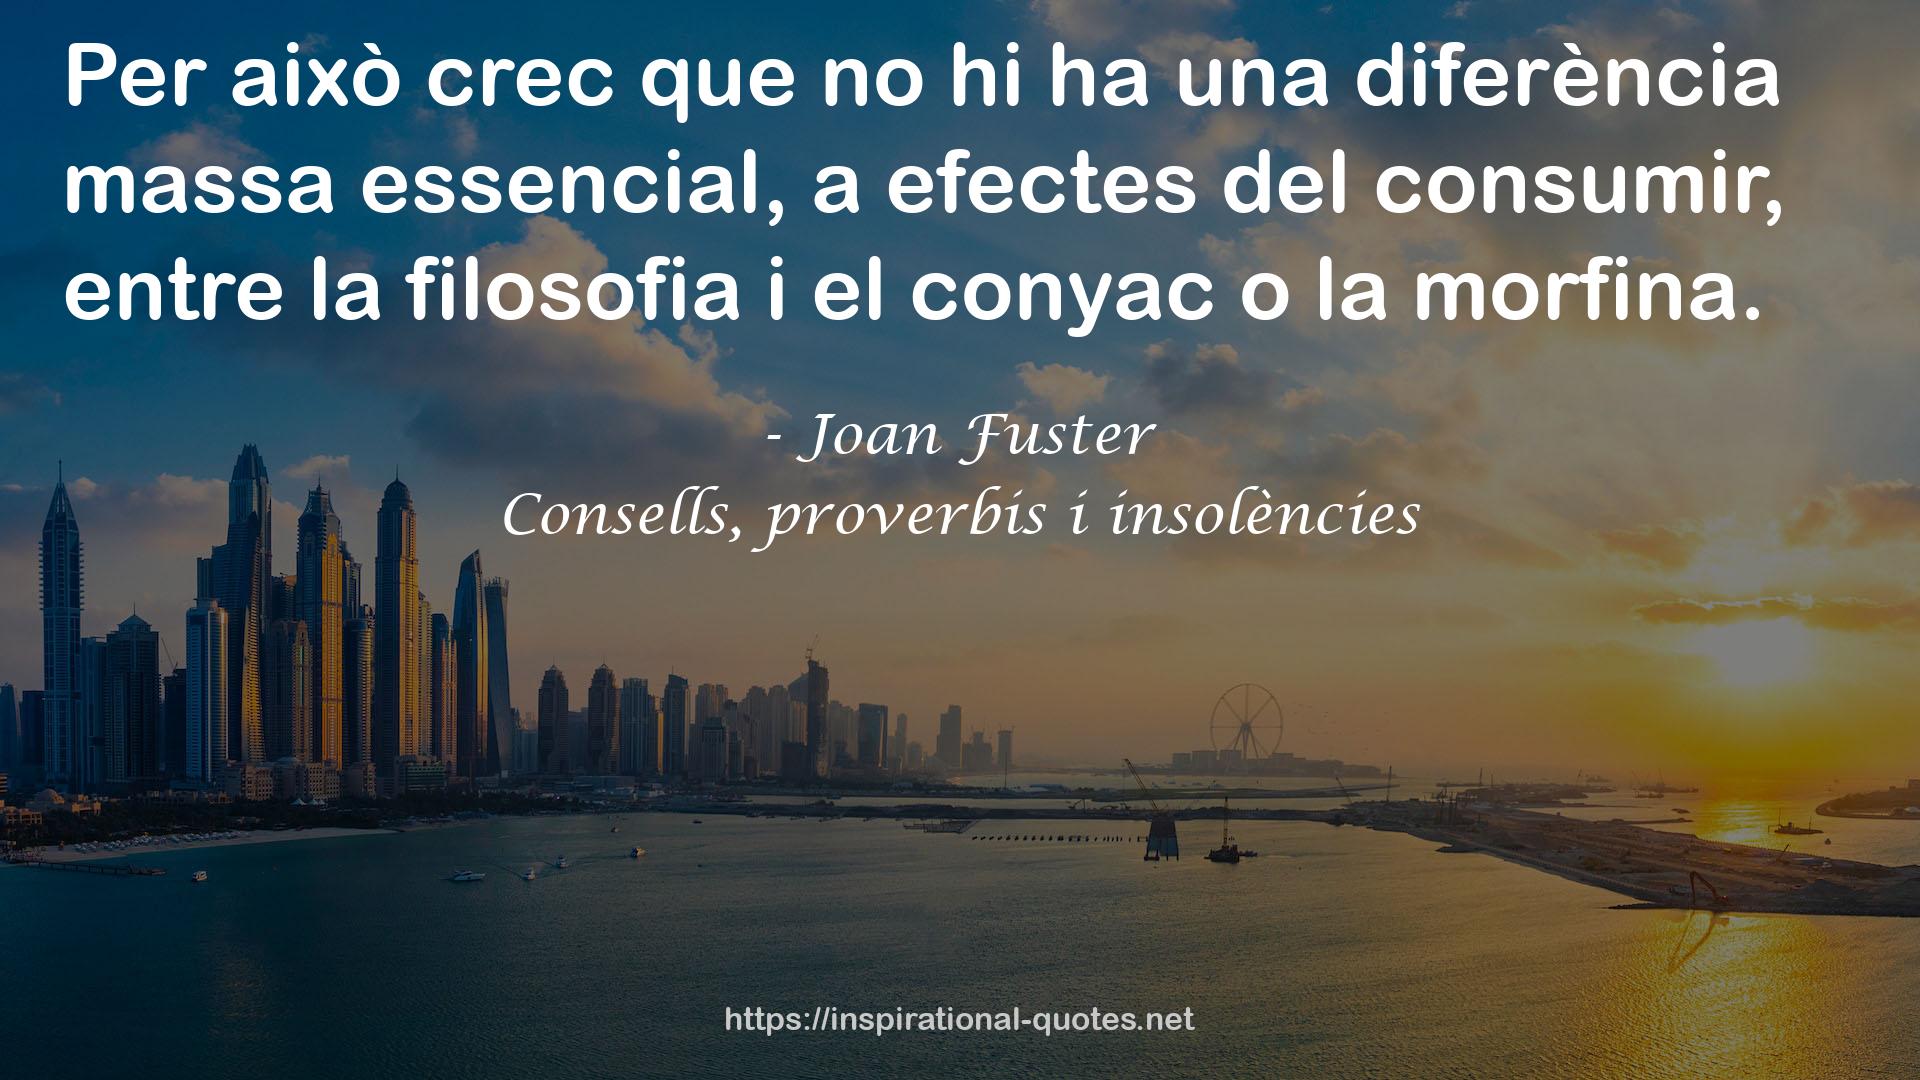 Joan Fuster QUOTES